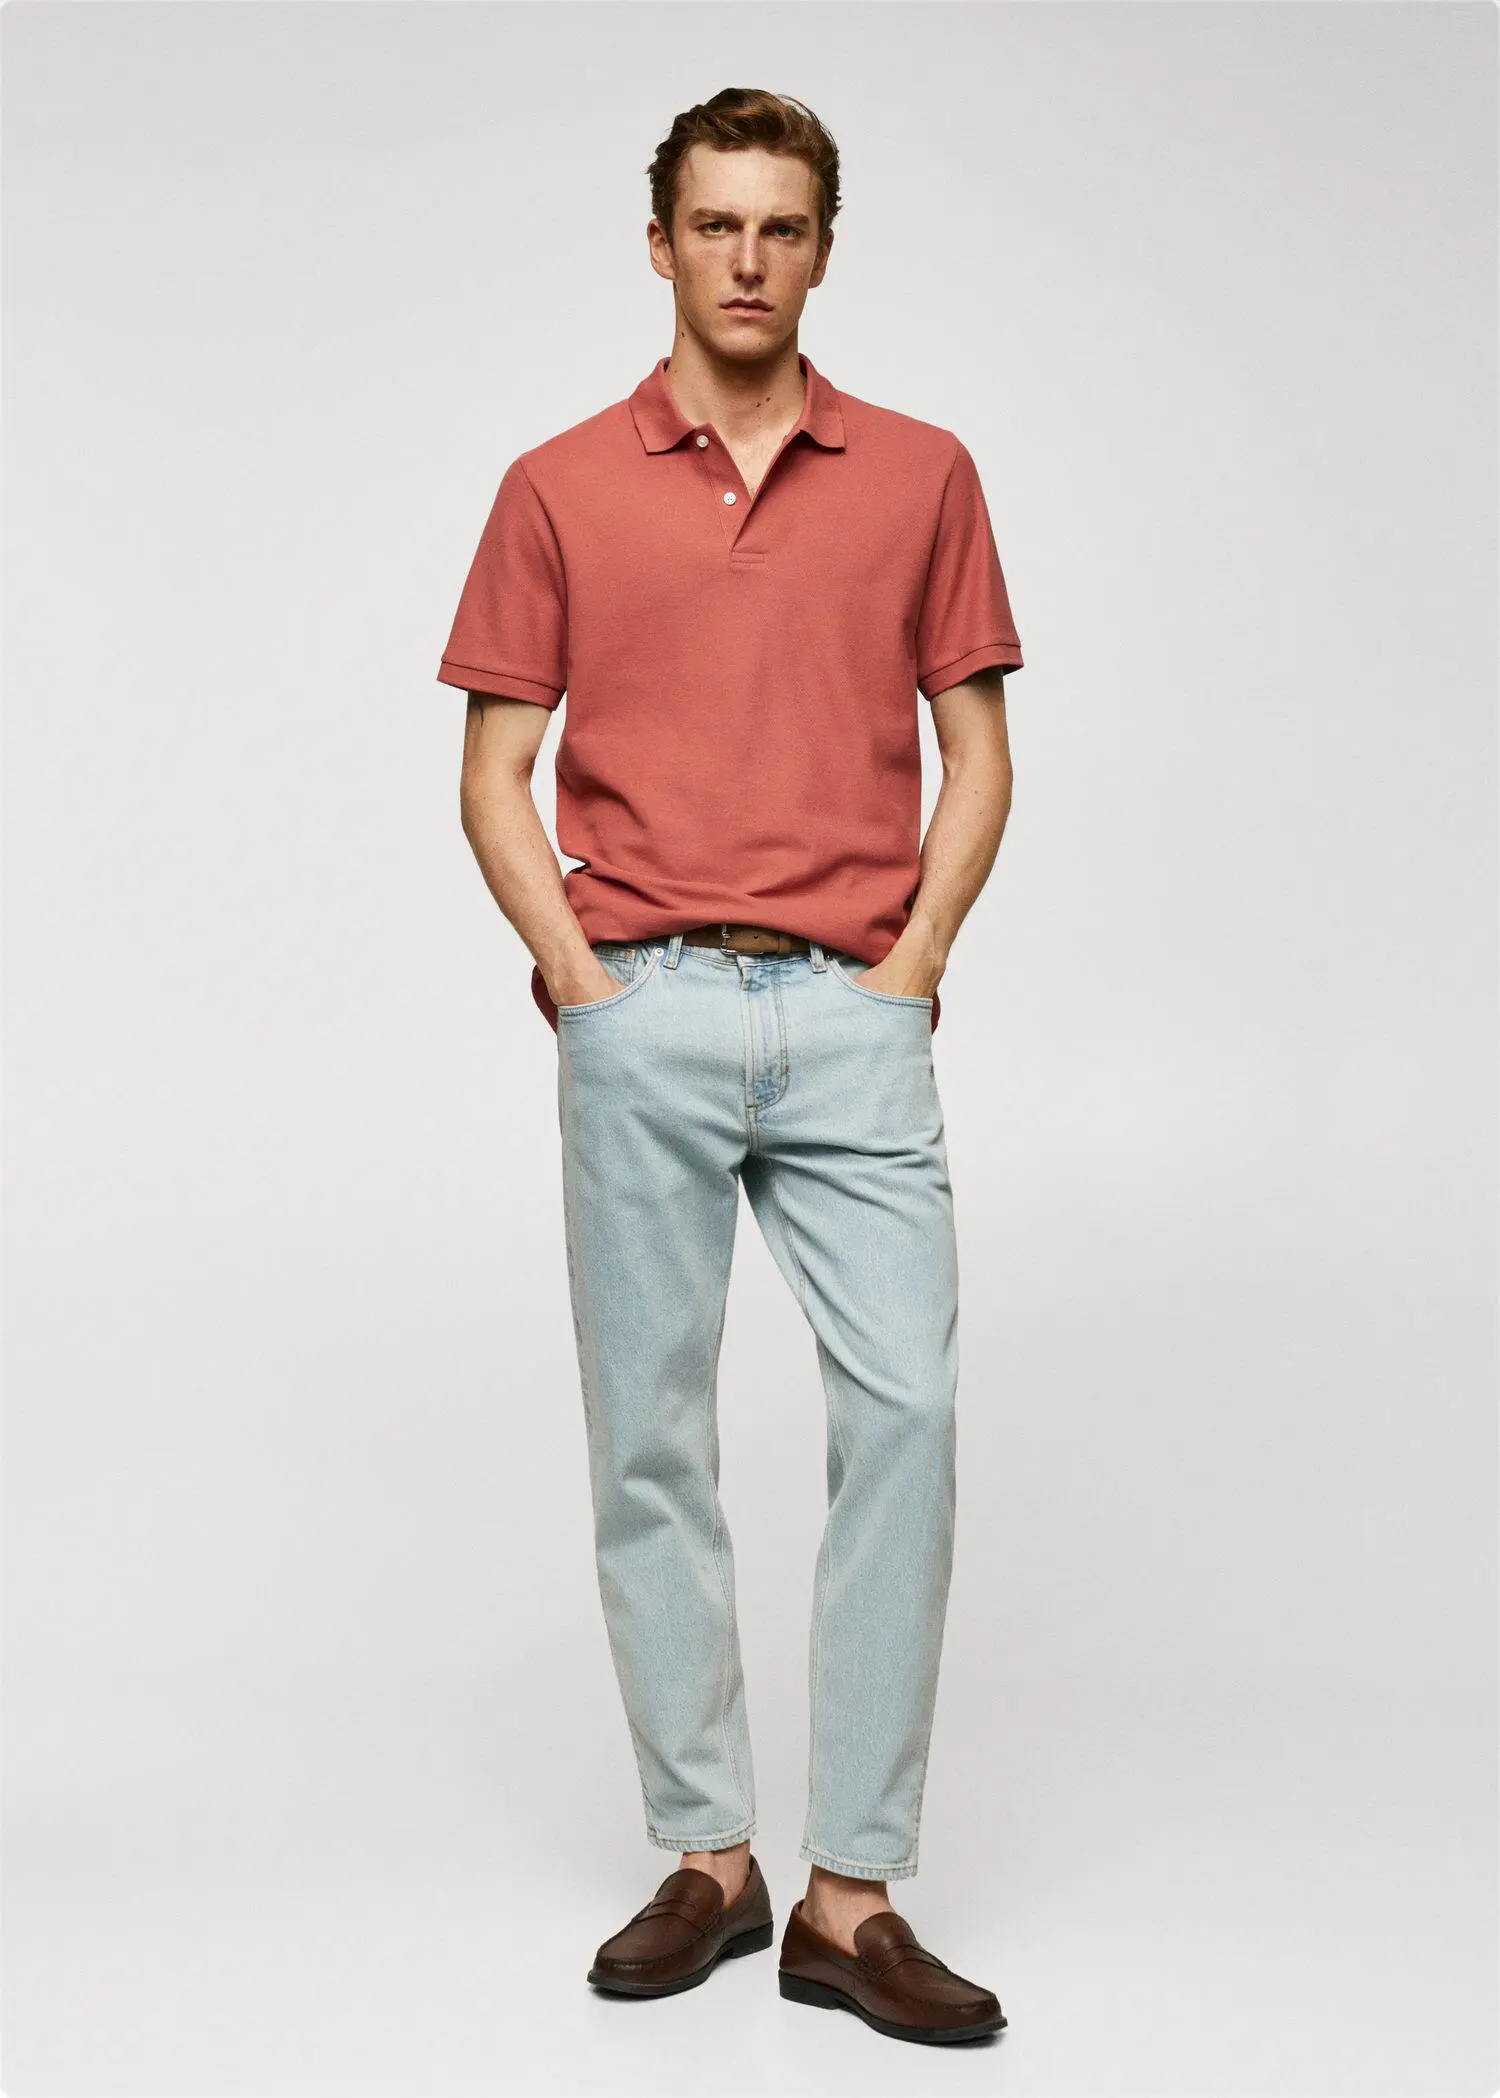 Mango 100% cotton pique polo shirt. a man in a red shirt and blue pants. 